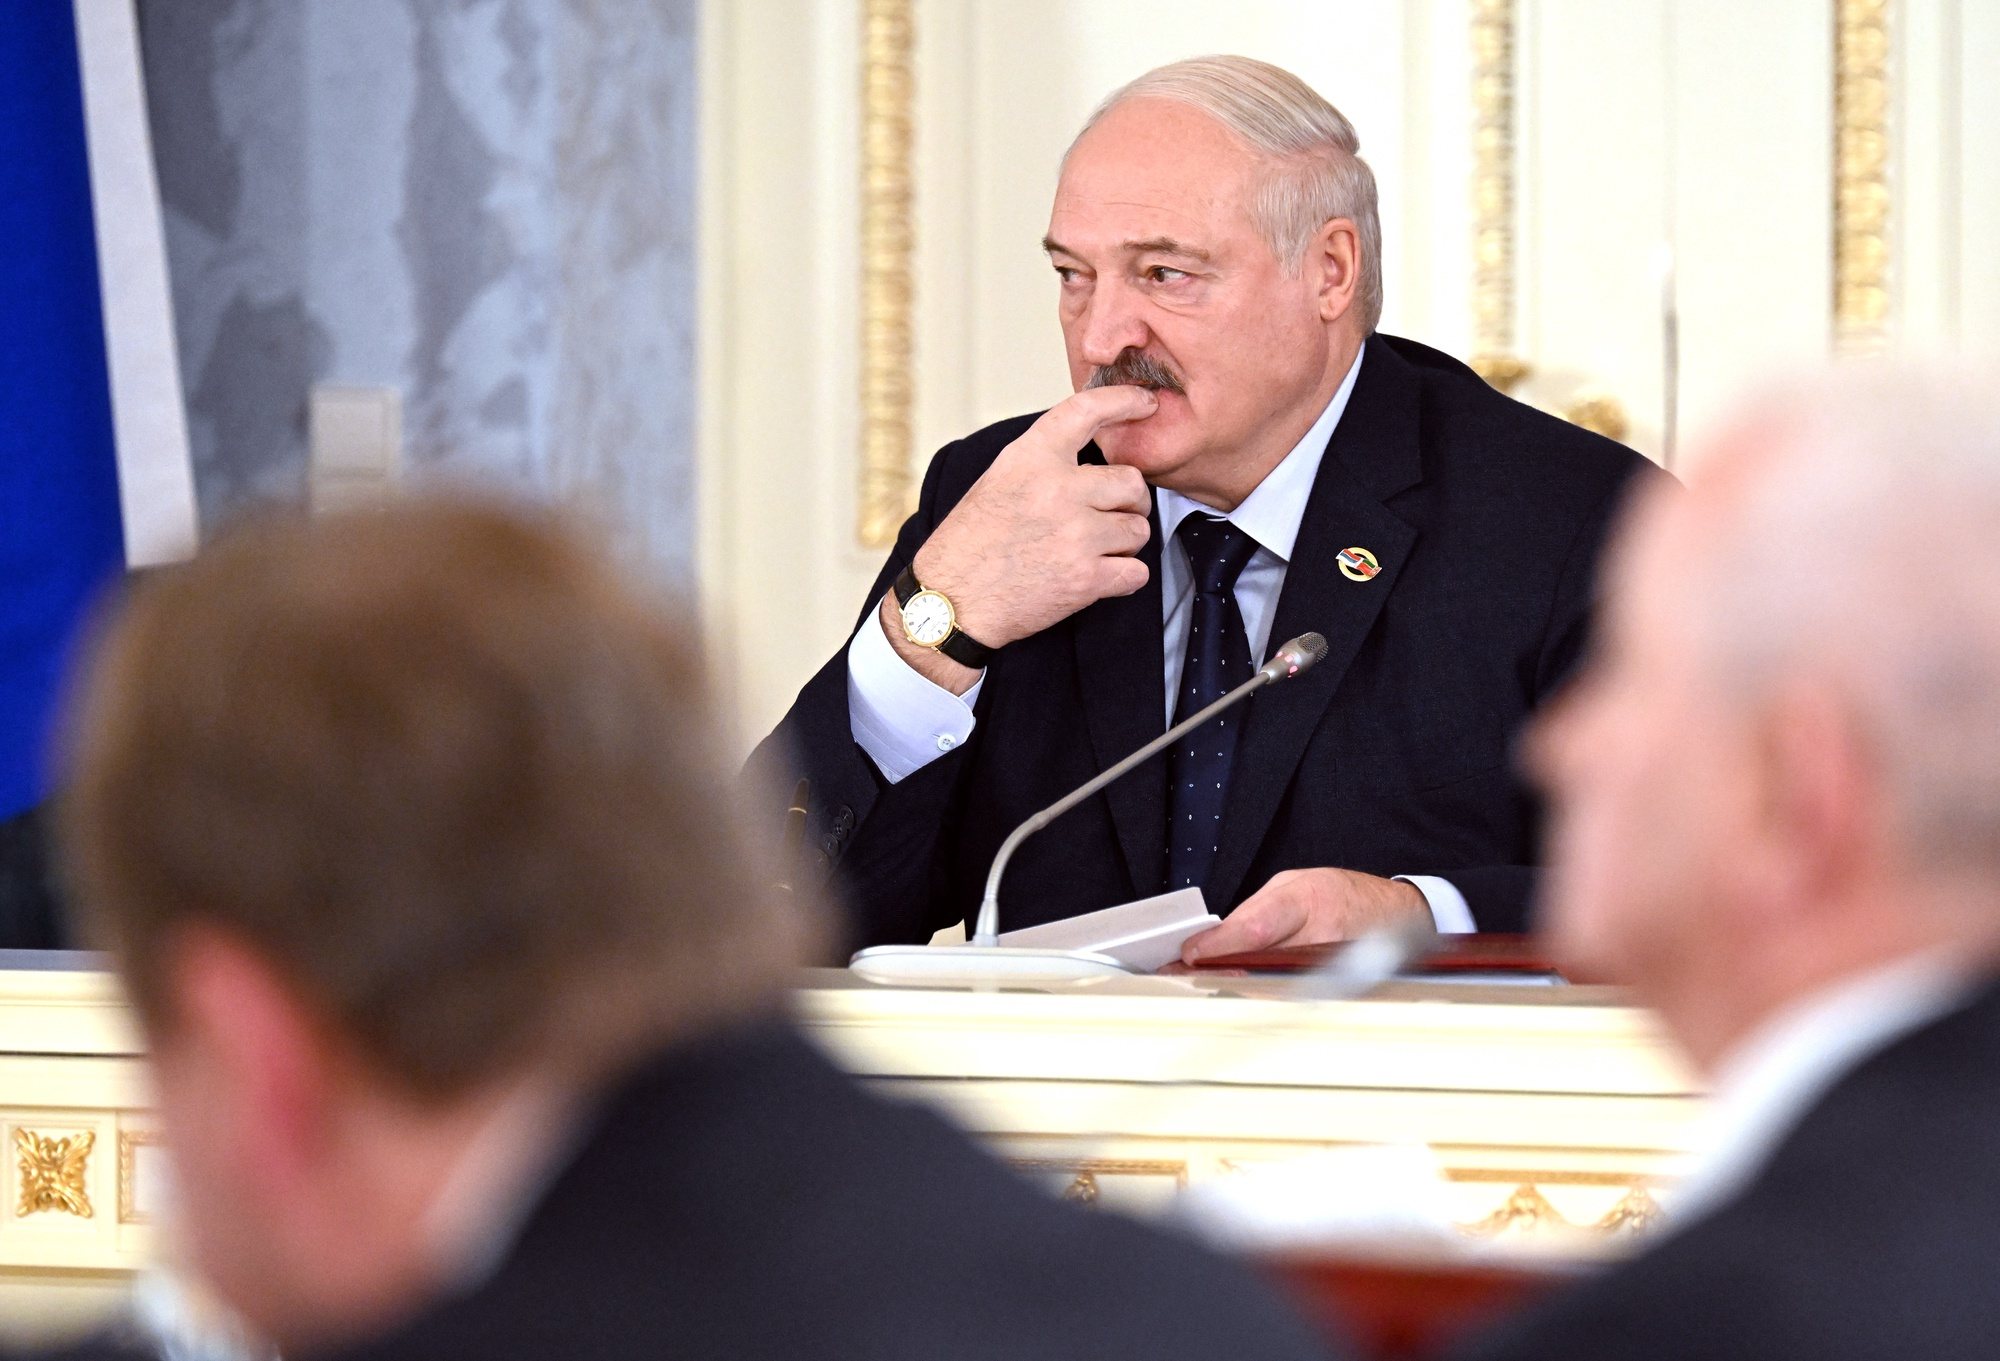 epa11112587 Belarusian President Alexander Lukashenko attends a meeting of the Supreme State Council of the Russia-Belarus Union State in St. Petersburg, Russia, 29 January 2024. At a meeting of the Supreme State Council of the Union State, Alexander Lukashenko announced the need to intensify cooperation in the field of import substitution and proposed creating a union media holding.  EPA/PAVEL BEDNYAKOV / SPUTNIK / GOVERNMENT PRESS SERVICE POOL MANDATORY CREDIT